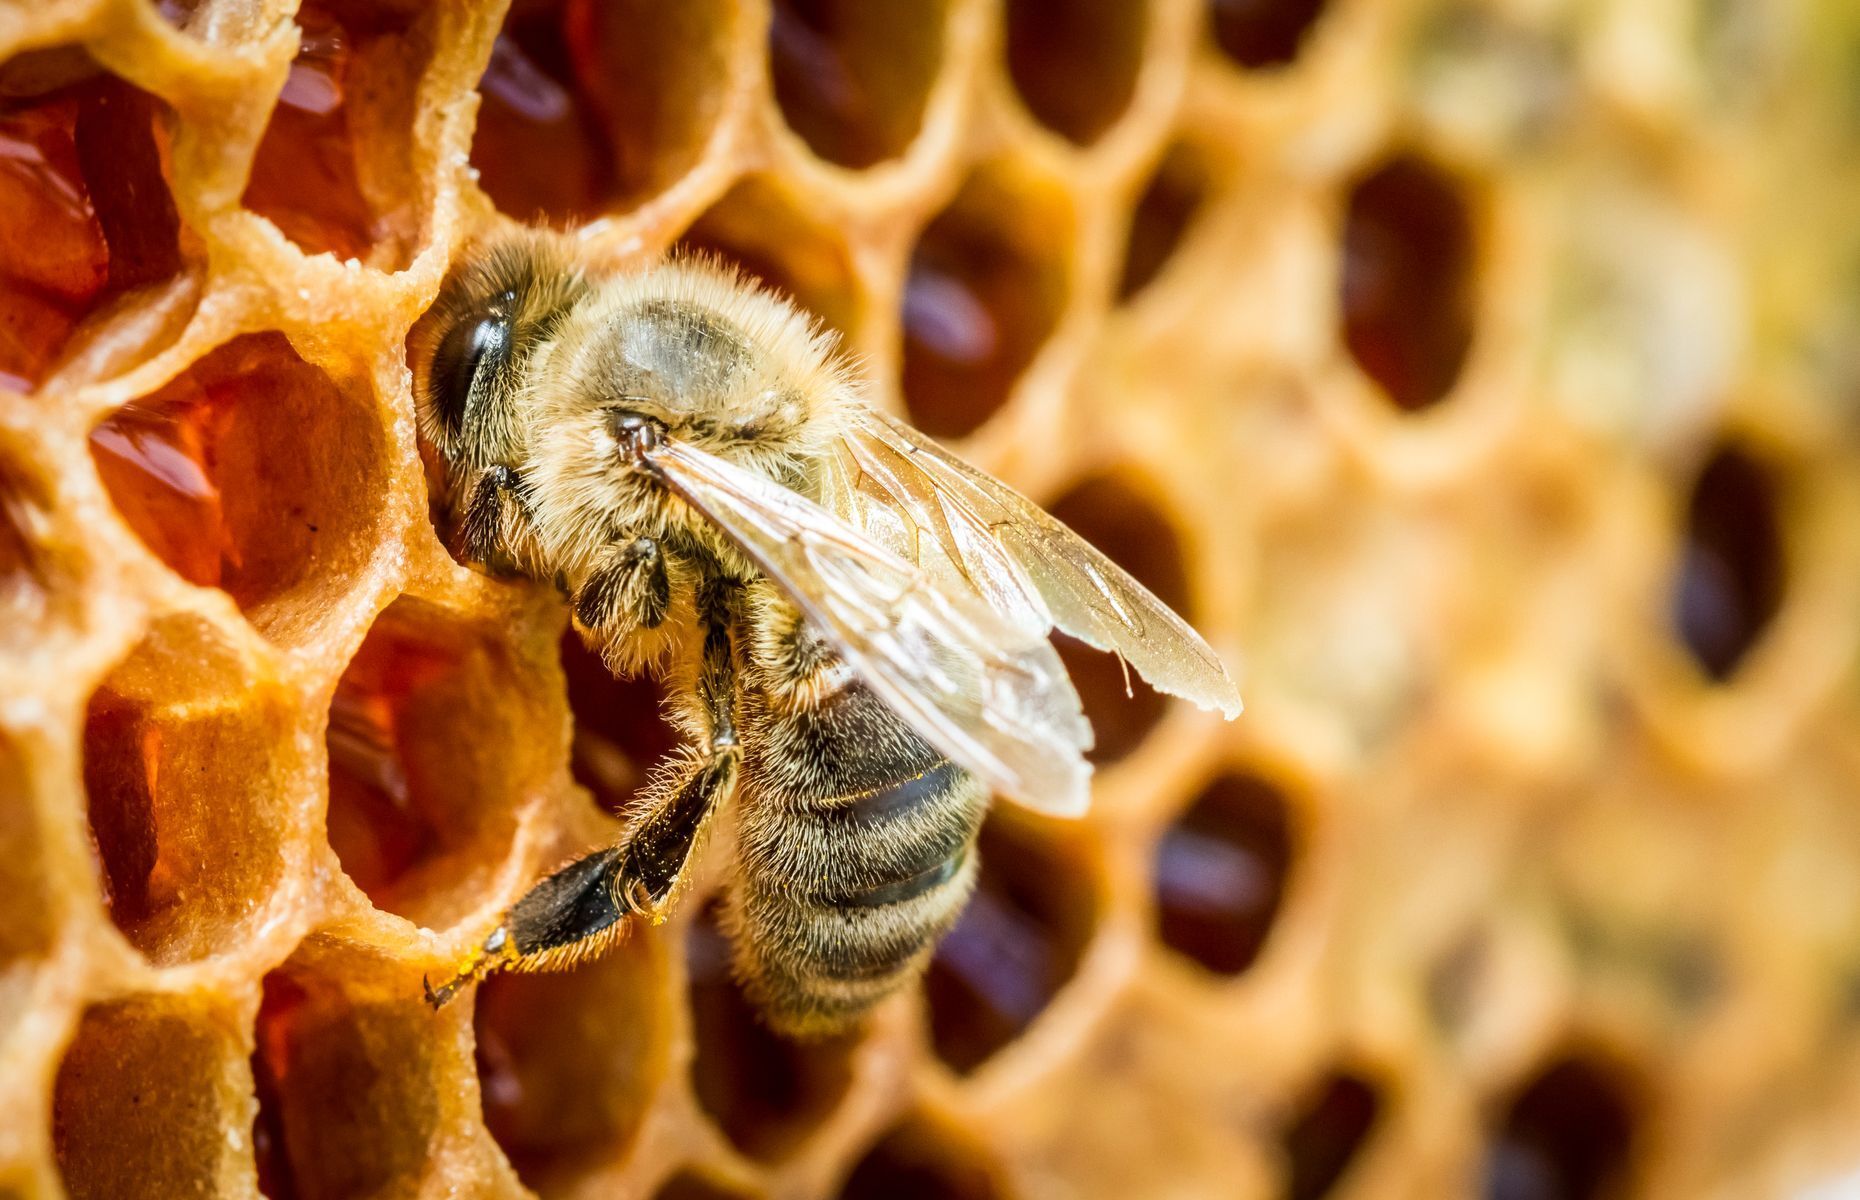 All bees contribute to <a href="https://www.theguardian.com/environment/2020/jul/29/bees-food-crops-shortage-study" rel="noreferrer noopener">pollination</a>. Of the nearly <a href="https://www.xerces.org/endangered-species/wild-bees" rel="noreferrer noopener">20,000</a> <a href="https://www.xerces.org/endangered-species/wild-bees" rel="noreferrer noopener">wild species,</a> most are solitary, feeding on flower pollen and nectar to survive. In contrast, domesticated bees, also known as <a href="https://m.espacepourlavie.ca/blogue/en/discovering-bees-insectarium" rel="noreferrer noopener"><em>Apis mellifera</em></a> or honey bees, are native to Europe, live in colonies, and produce honey.